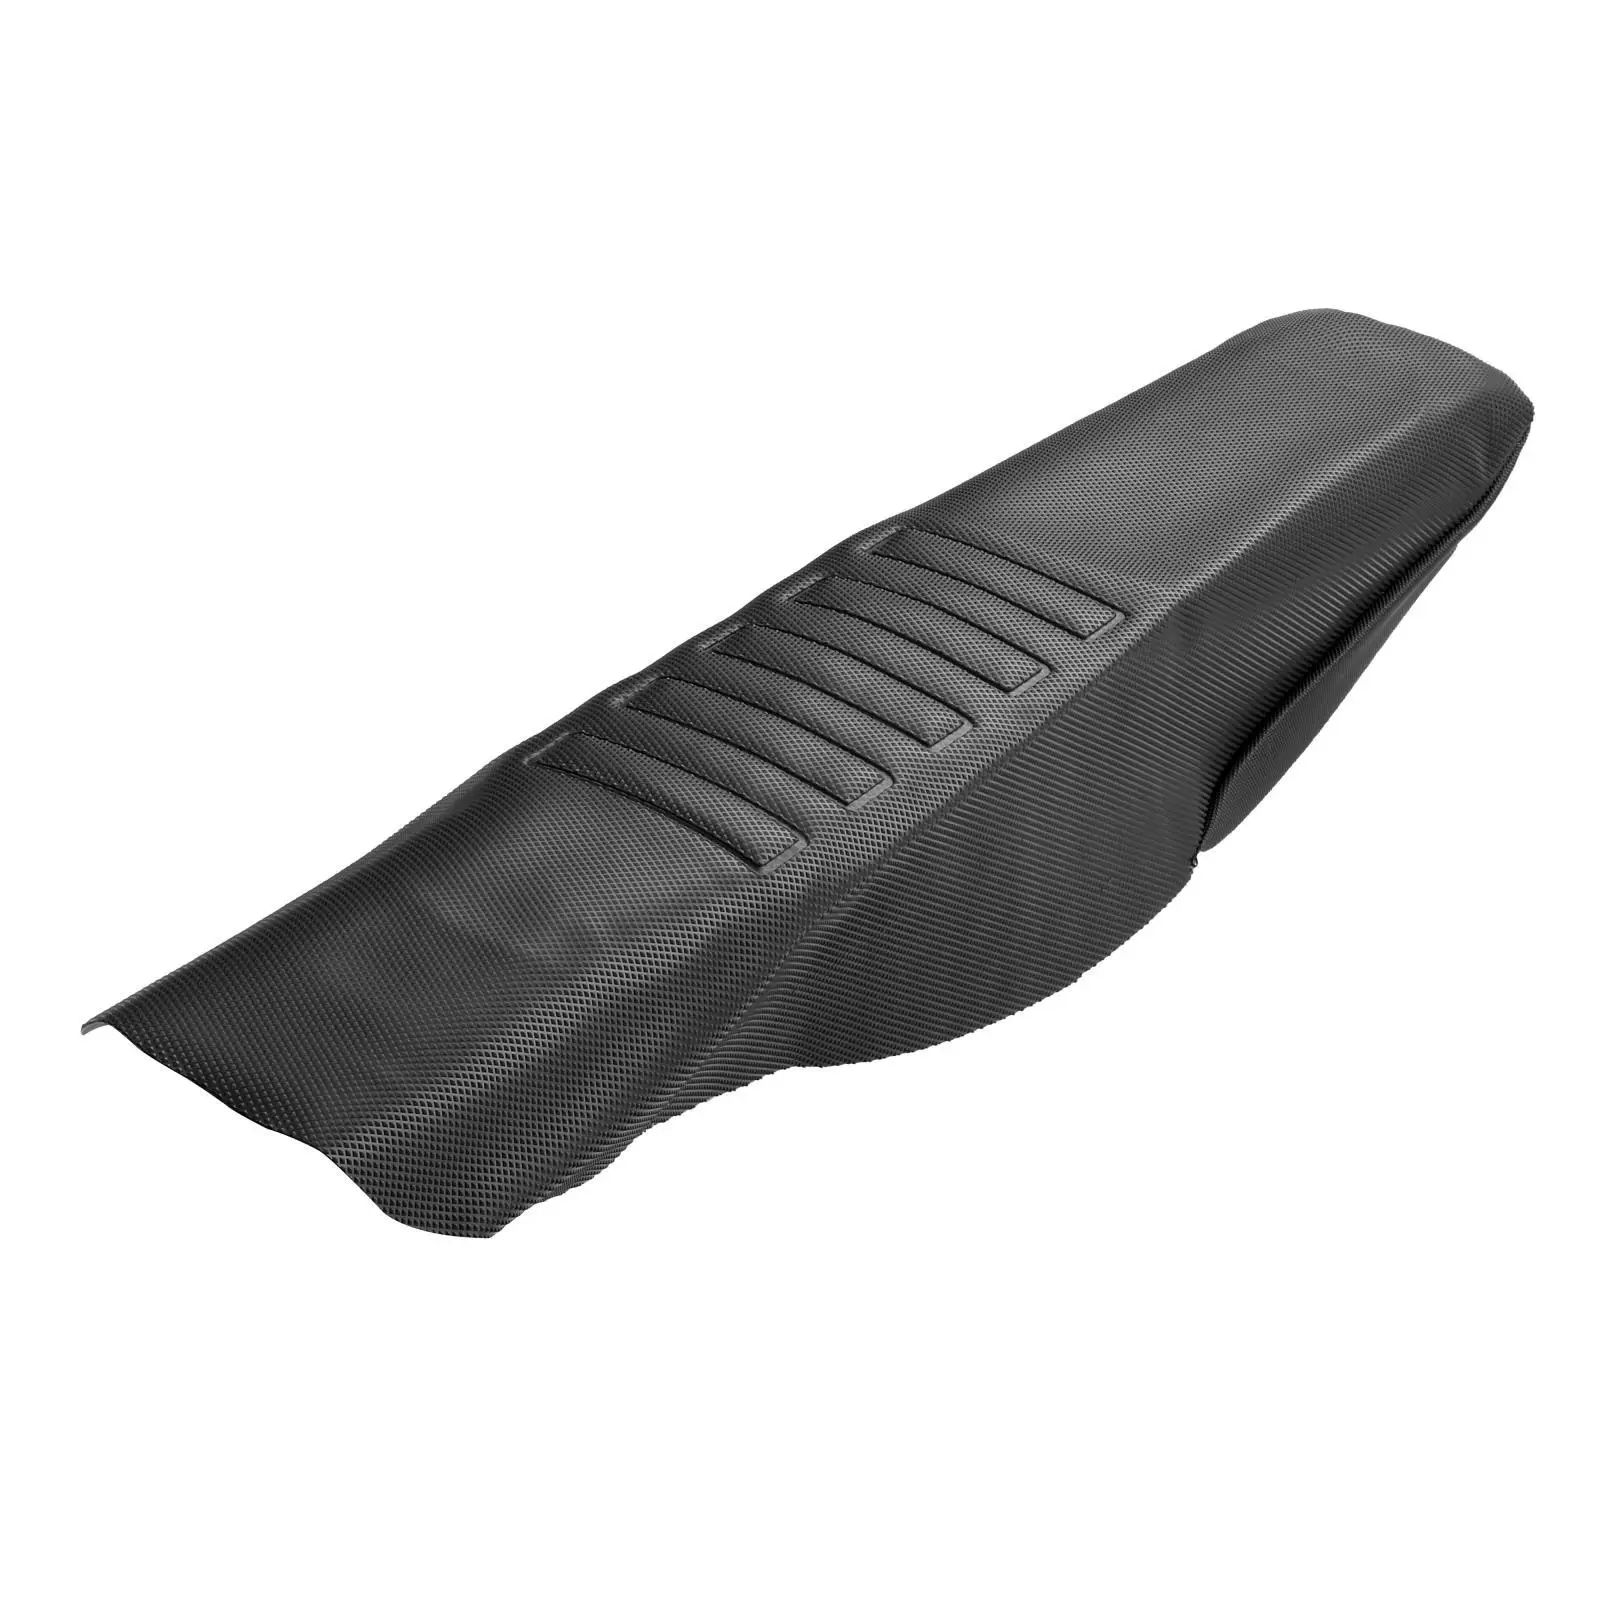 Motorcycle Seat Cushion Decoration EVA Material Non-Slip Accessories Fits for Crf Kxf Yzf